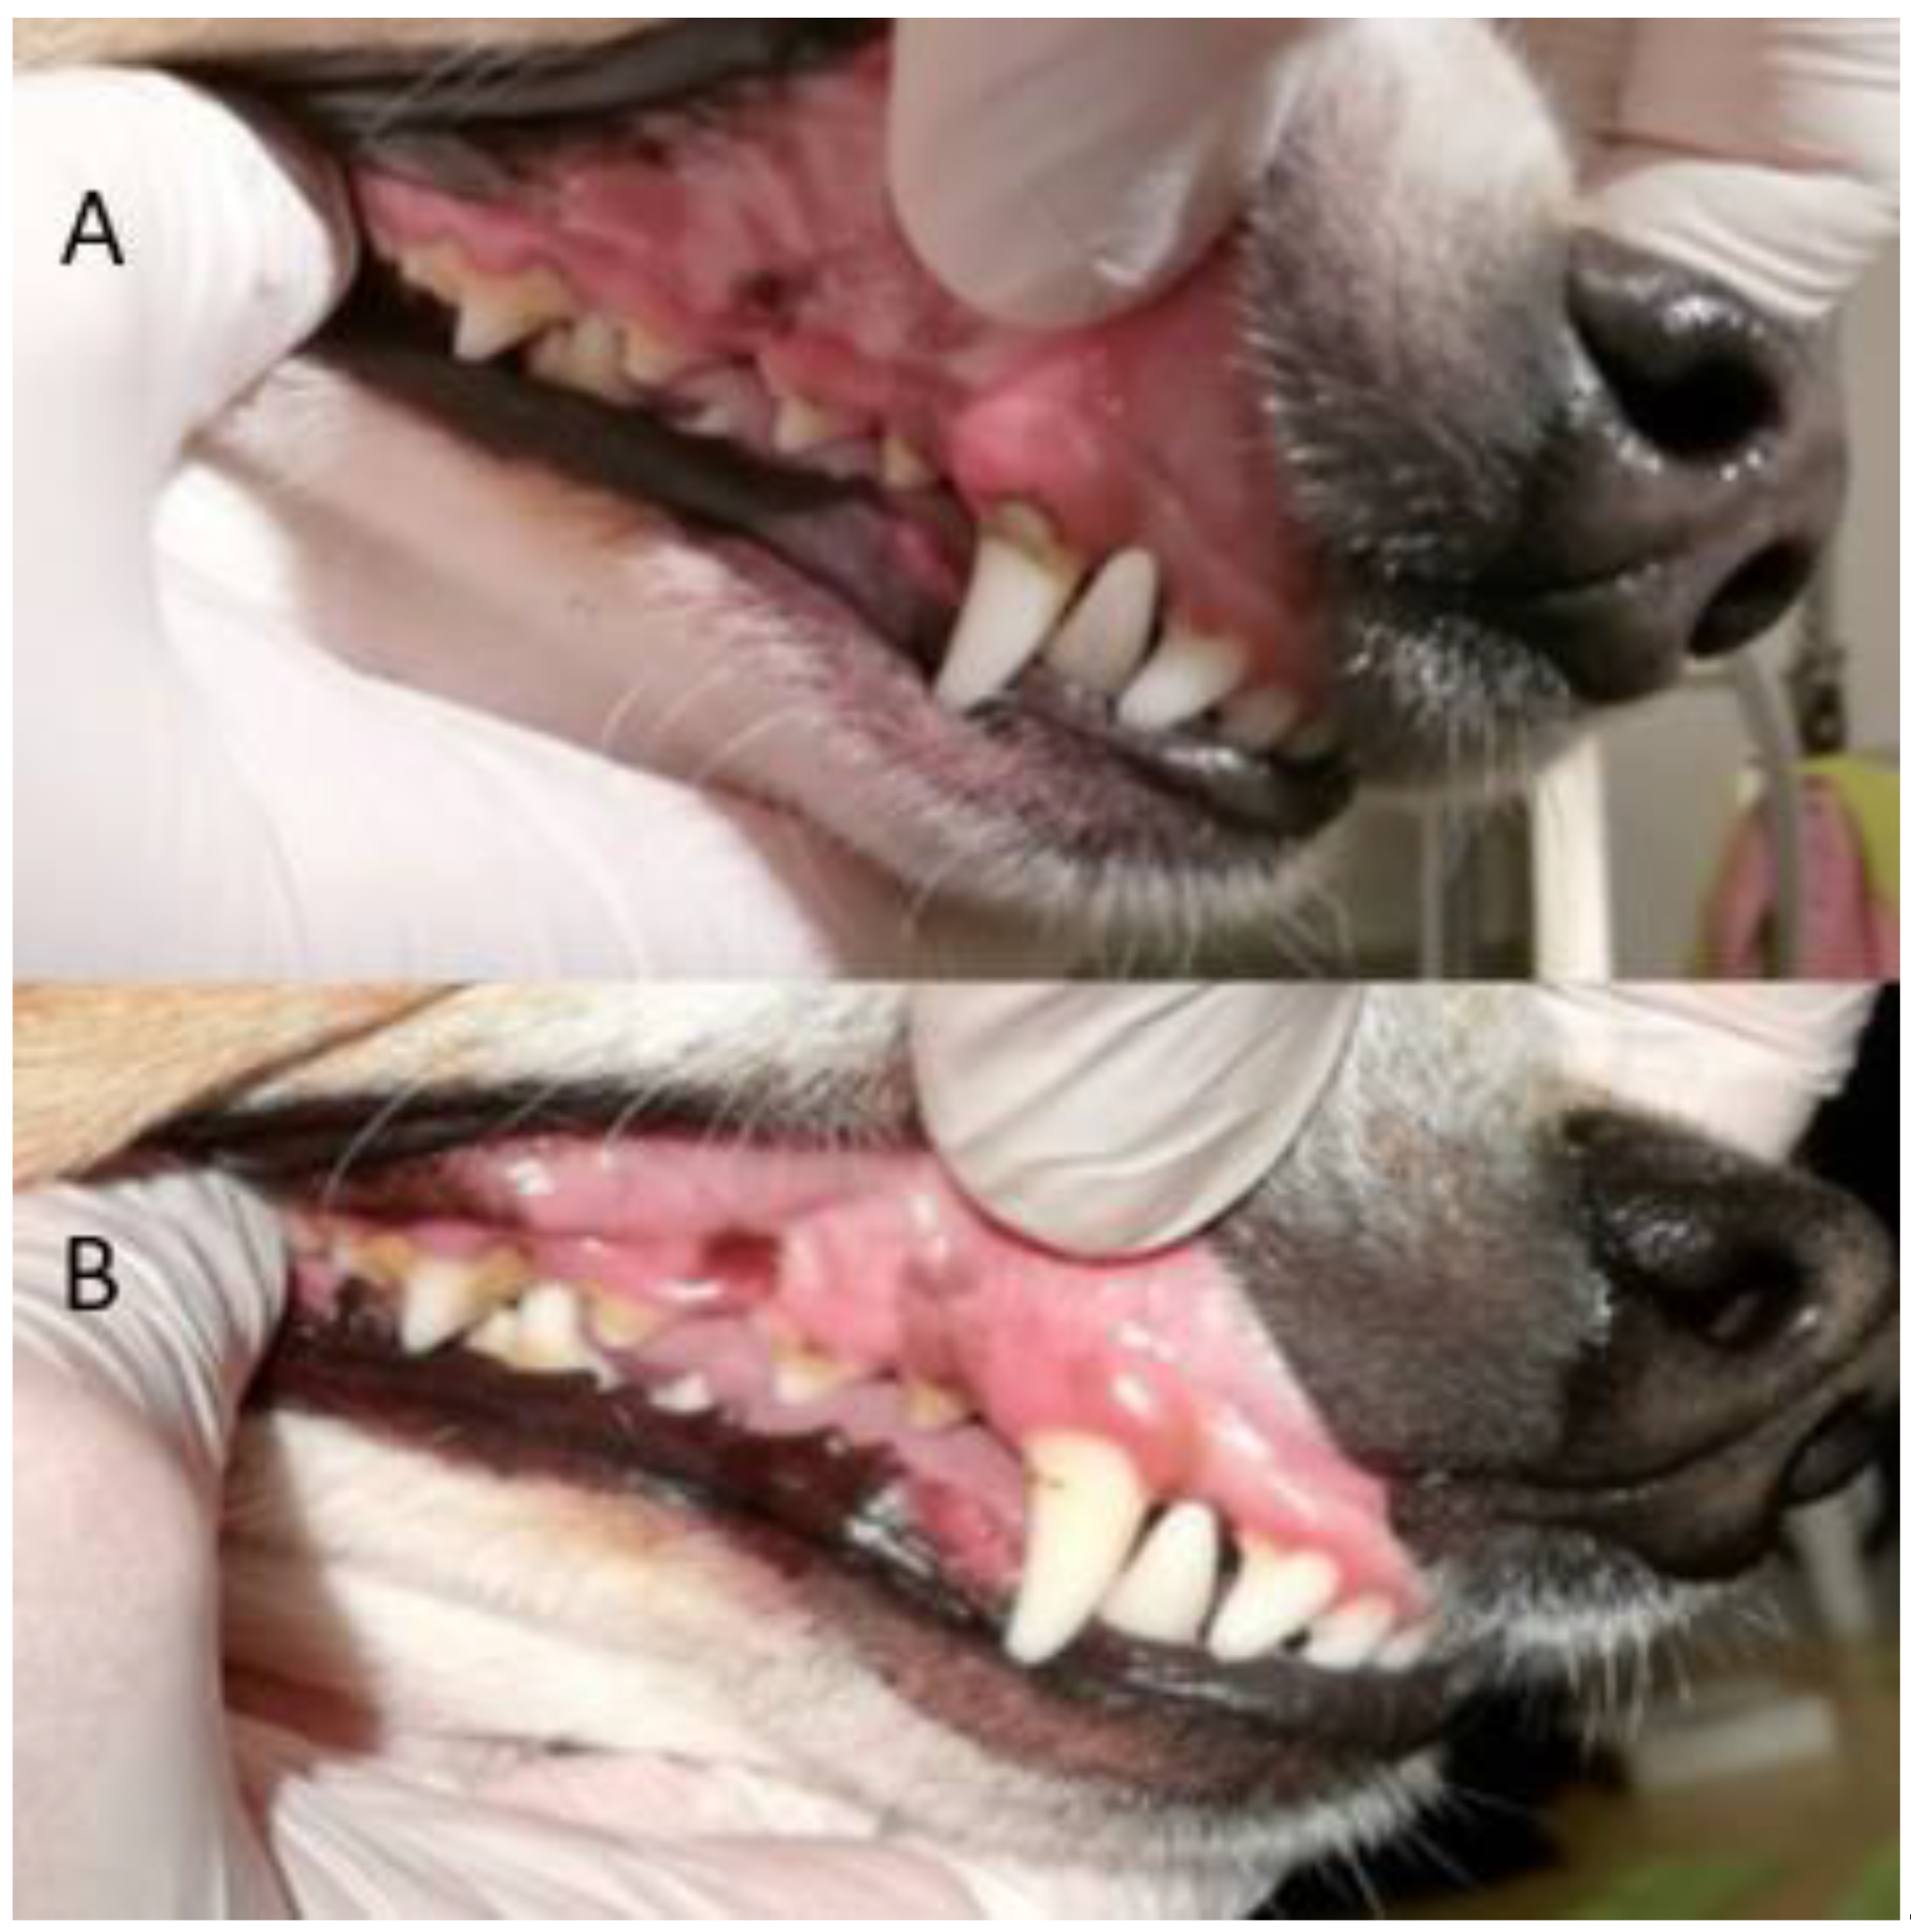 Animals | Free Full-Text | Improved Oral Health and Adaptation to Treatment  in Dogs Using Manual or Ultrasonic Toothbrush or Textile of Nylon or  Microfiber for Active Dental Home Care | HTML